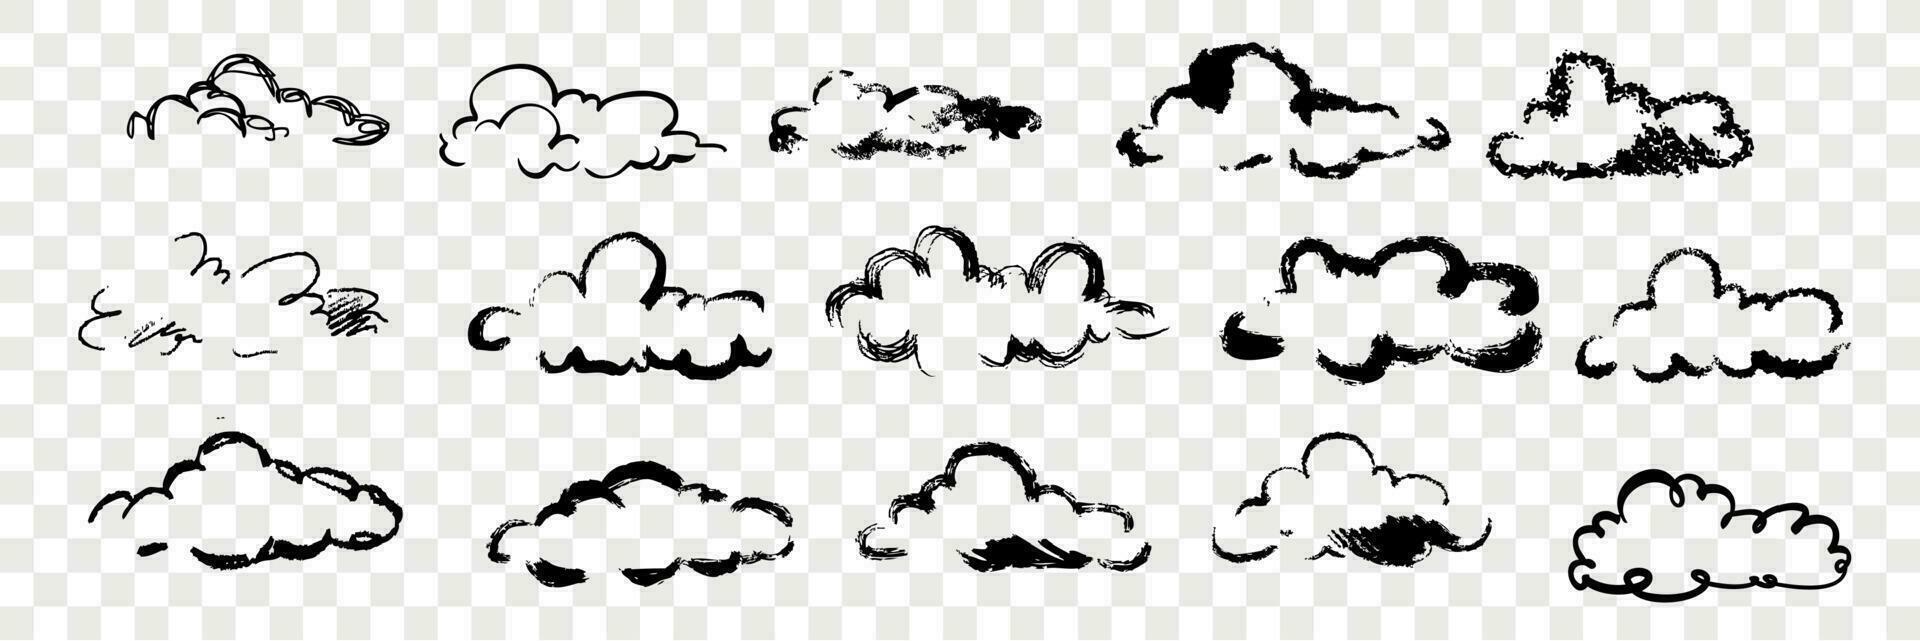 Hand drawn clouds set collection vector